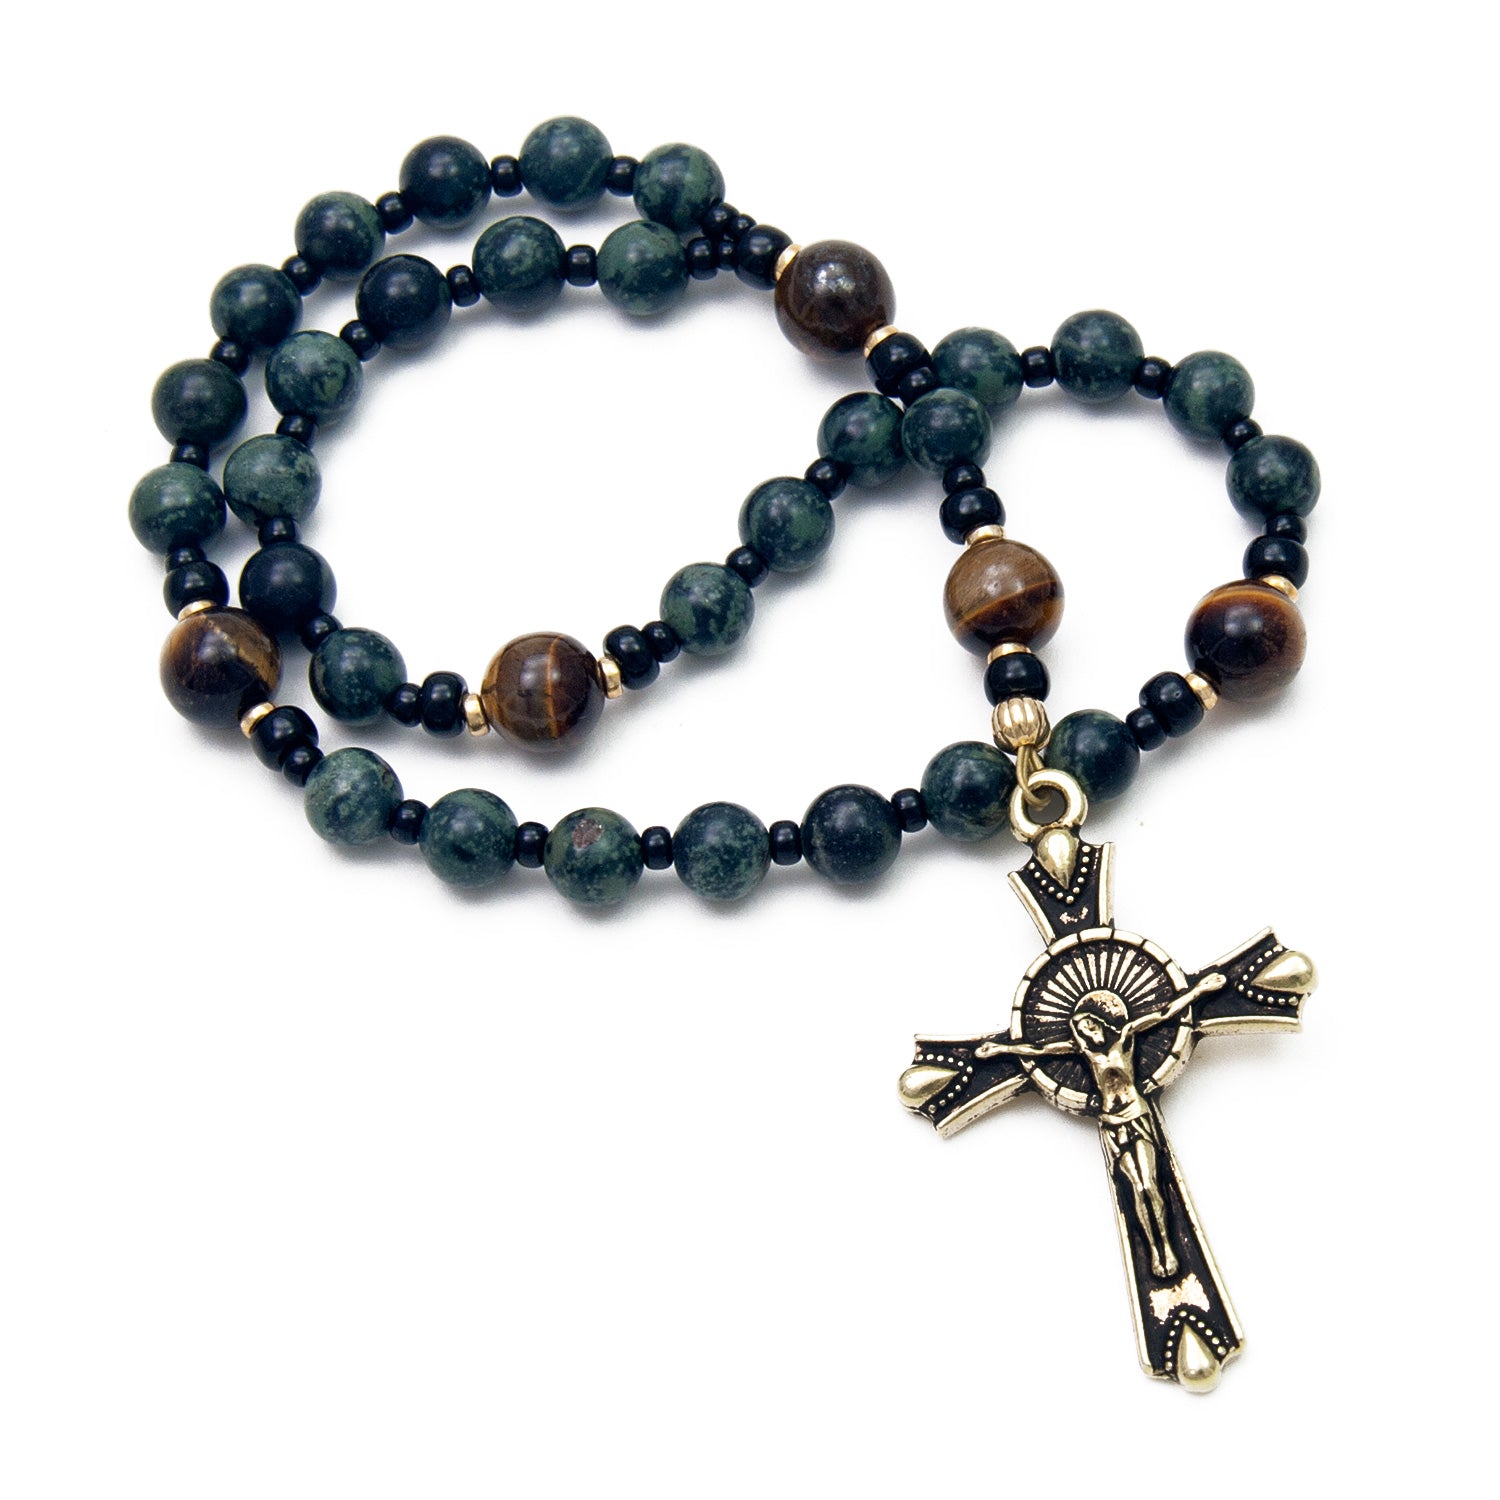 Christian Prayer Bracelets: Significance and Uses